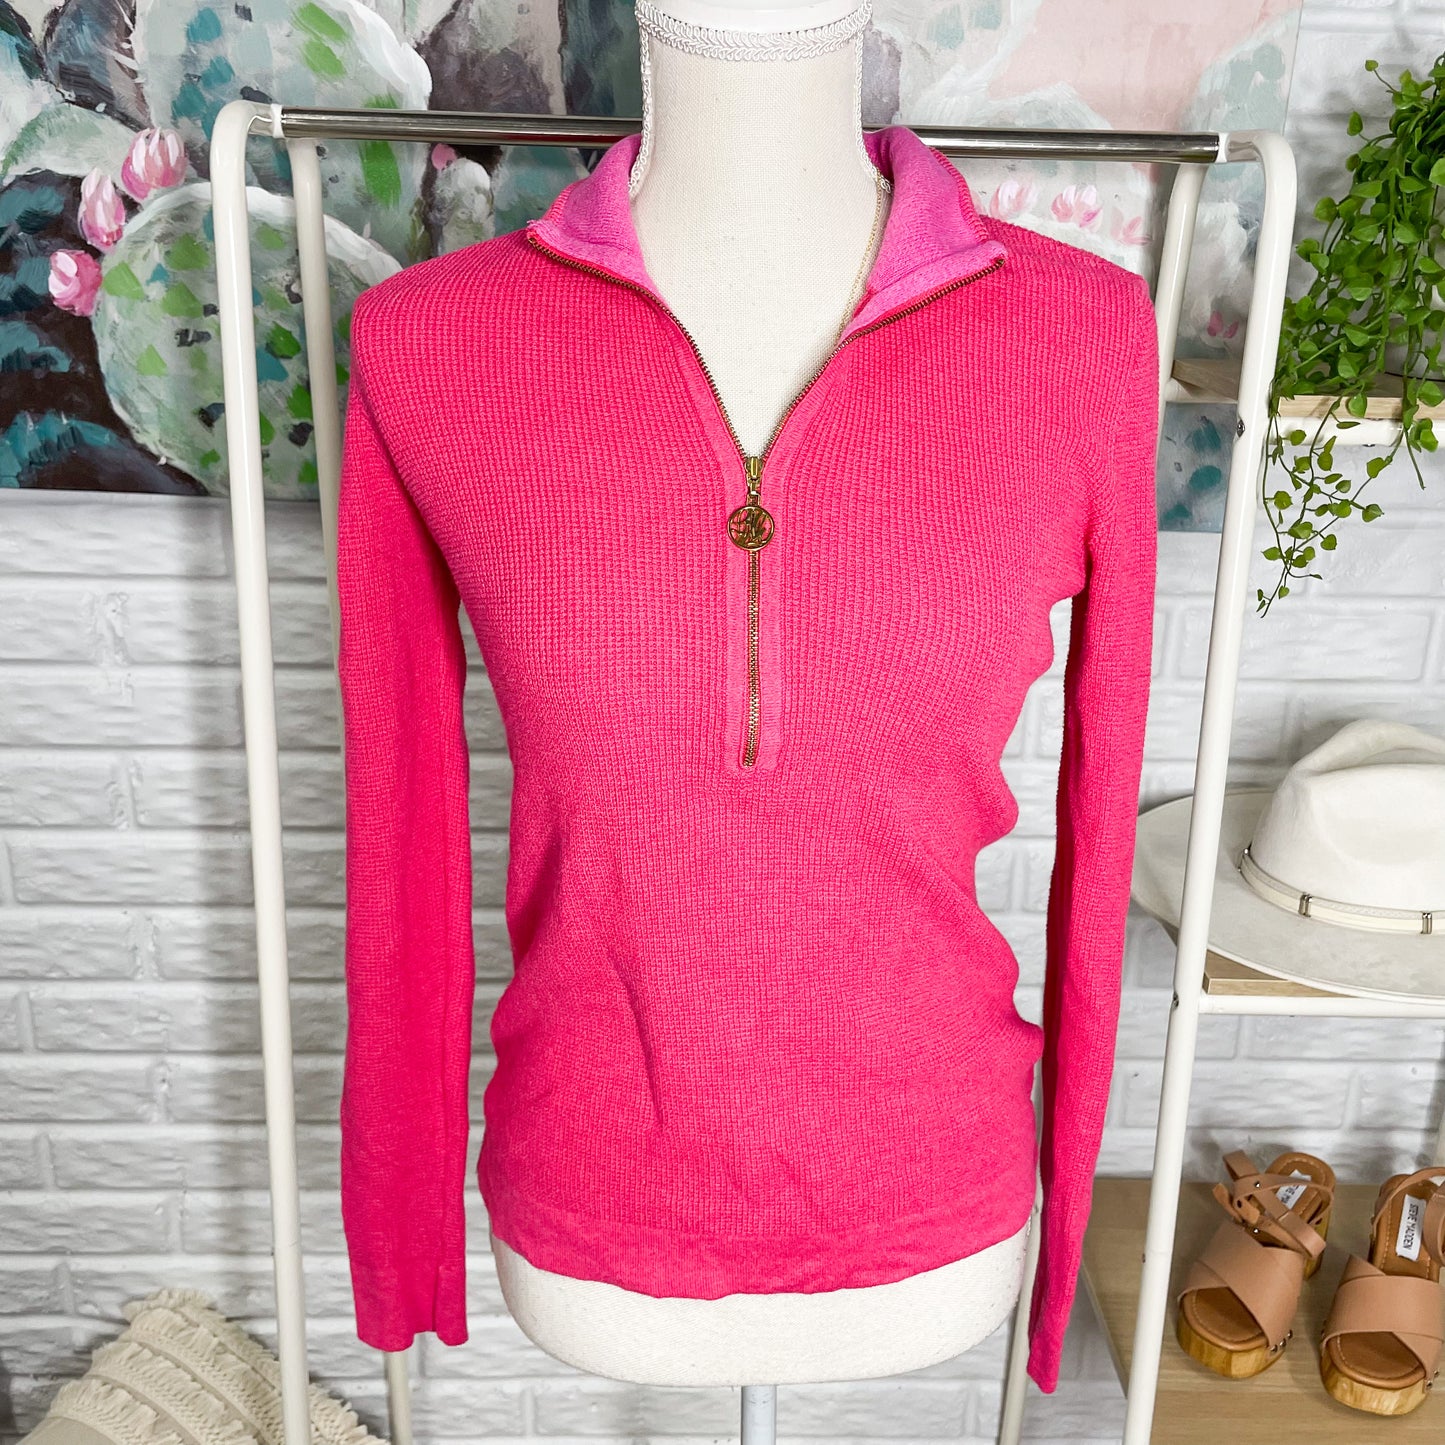 Lily Pulitzer Pink Half Zip Knit Pullover Sweater Size Small